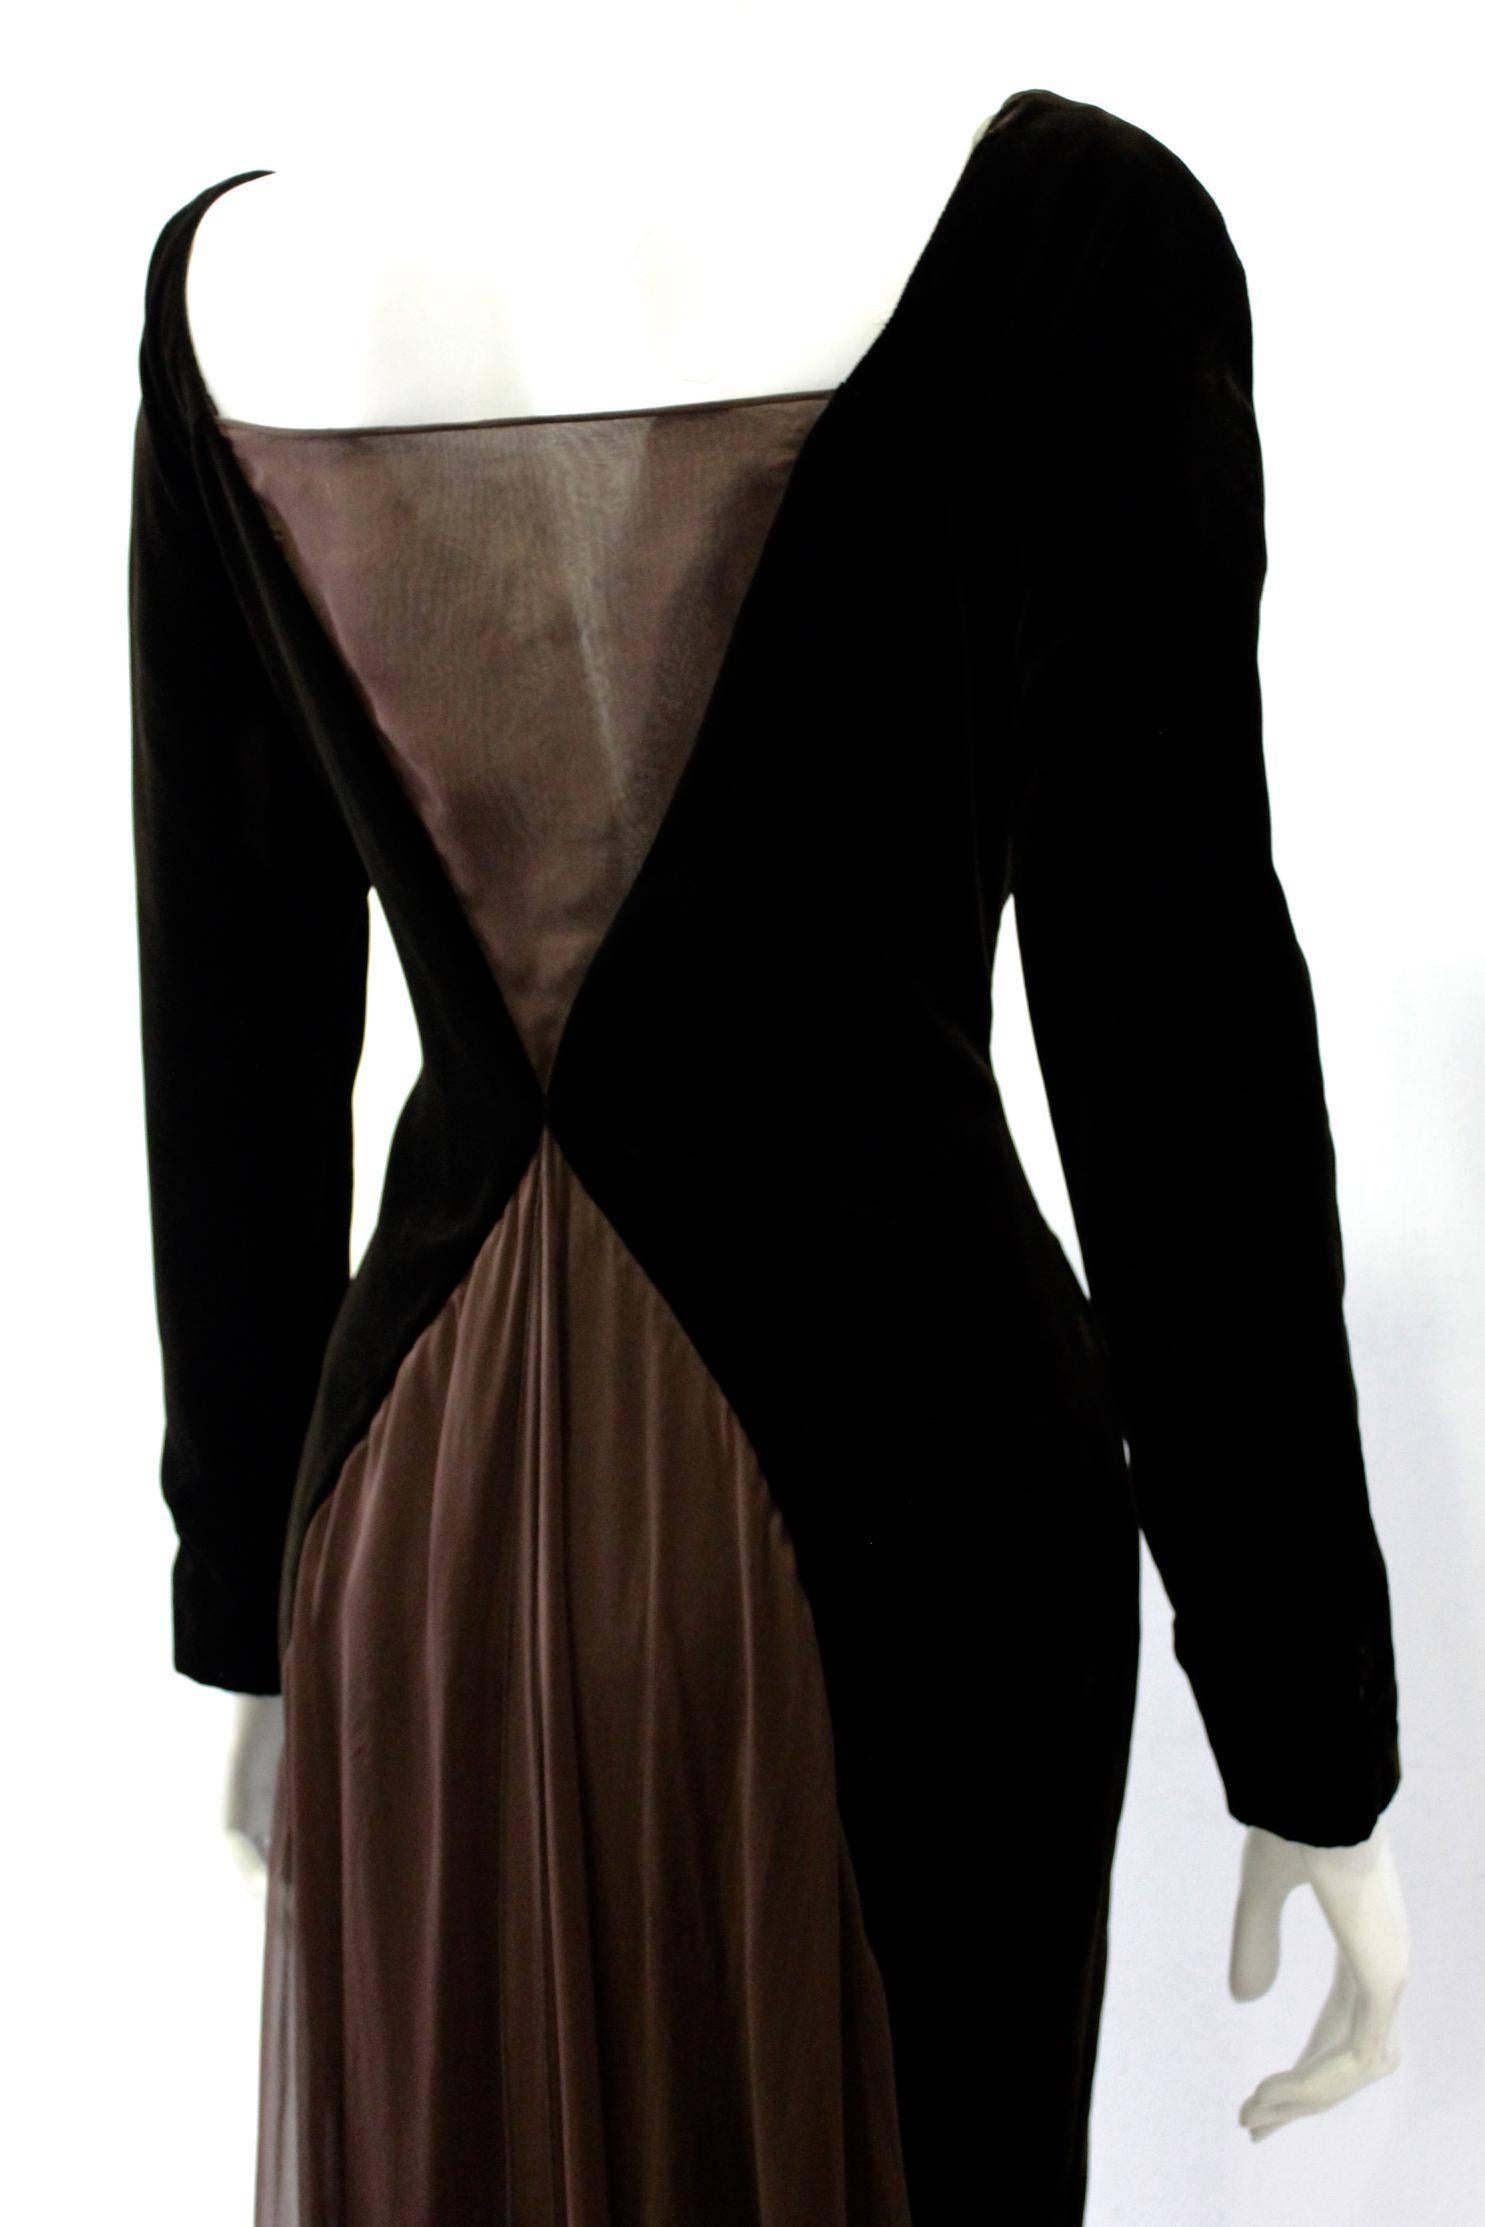 Gianfranco Ferre Silk Velvet Panel Evening Gown, 1989 In Excellent Condition For Sale In Athens, Agia Paraskevi